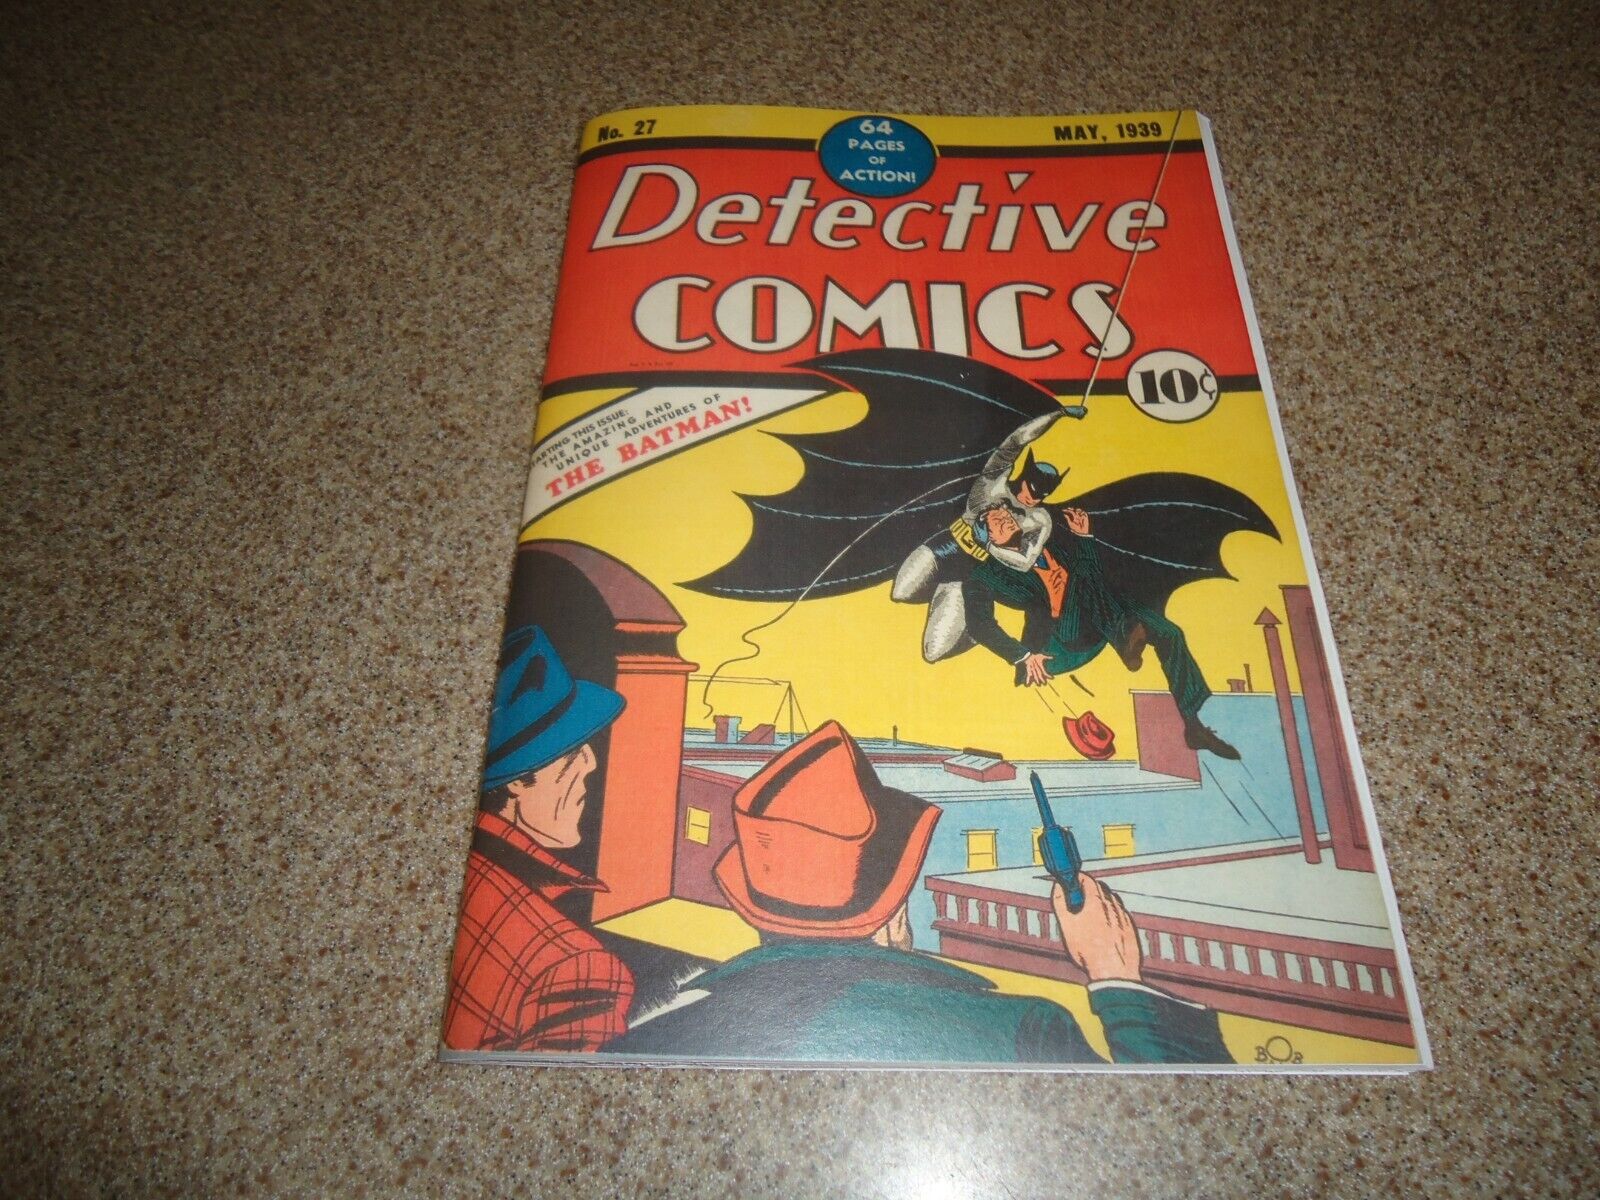 DETECTIVE COMICS #27 PHOTOCOPY EDITION THE FIRST APPEARANCE OF BATMAN